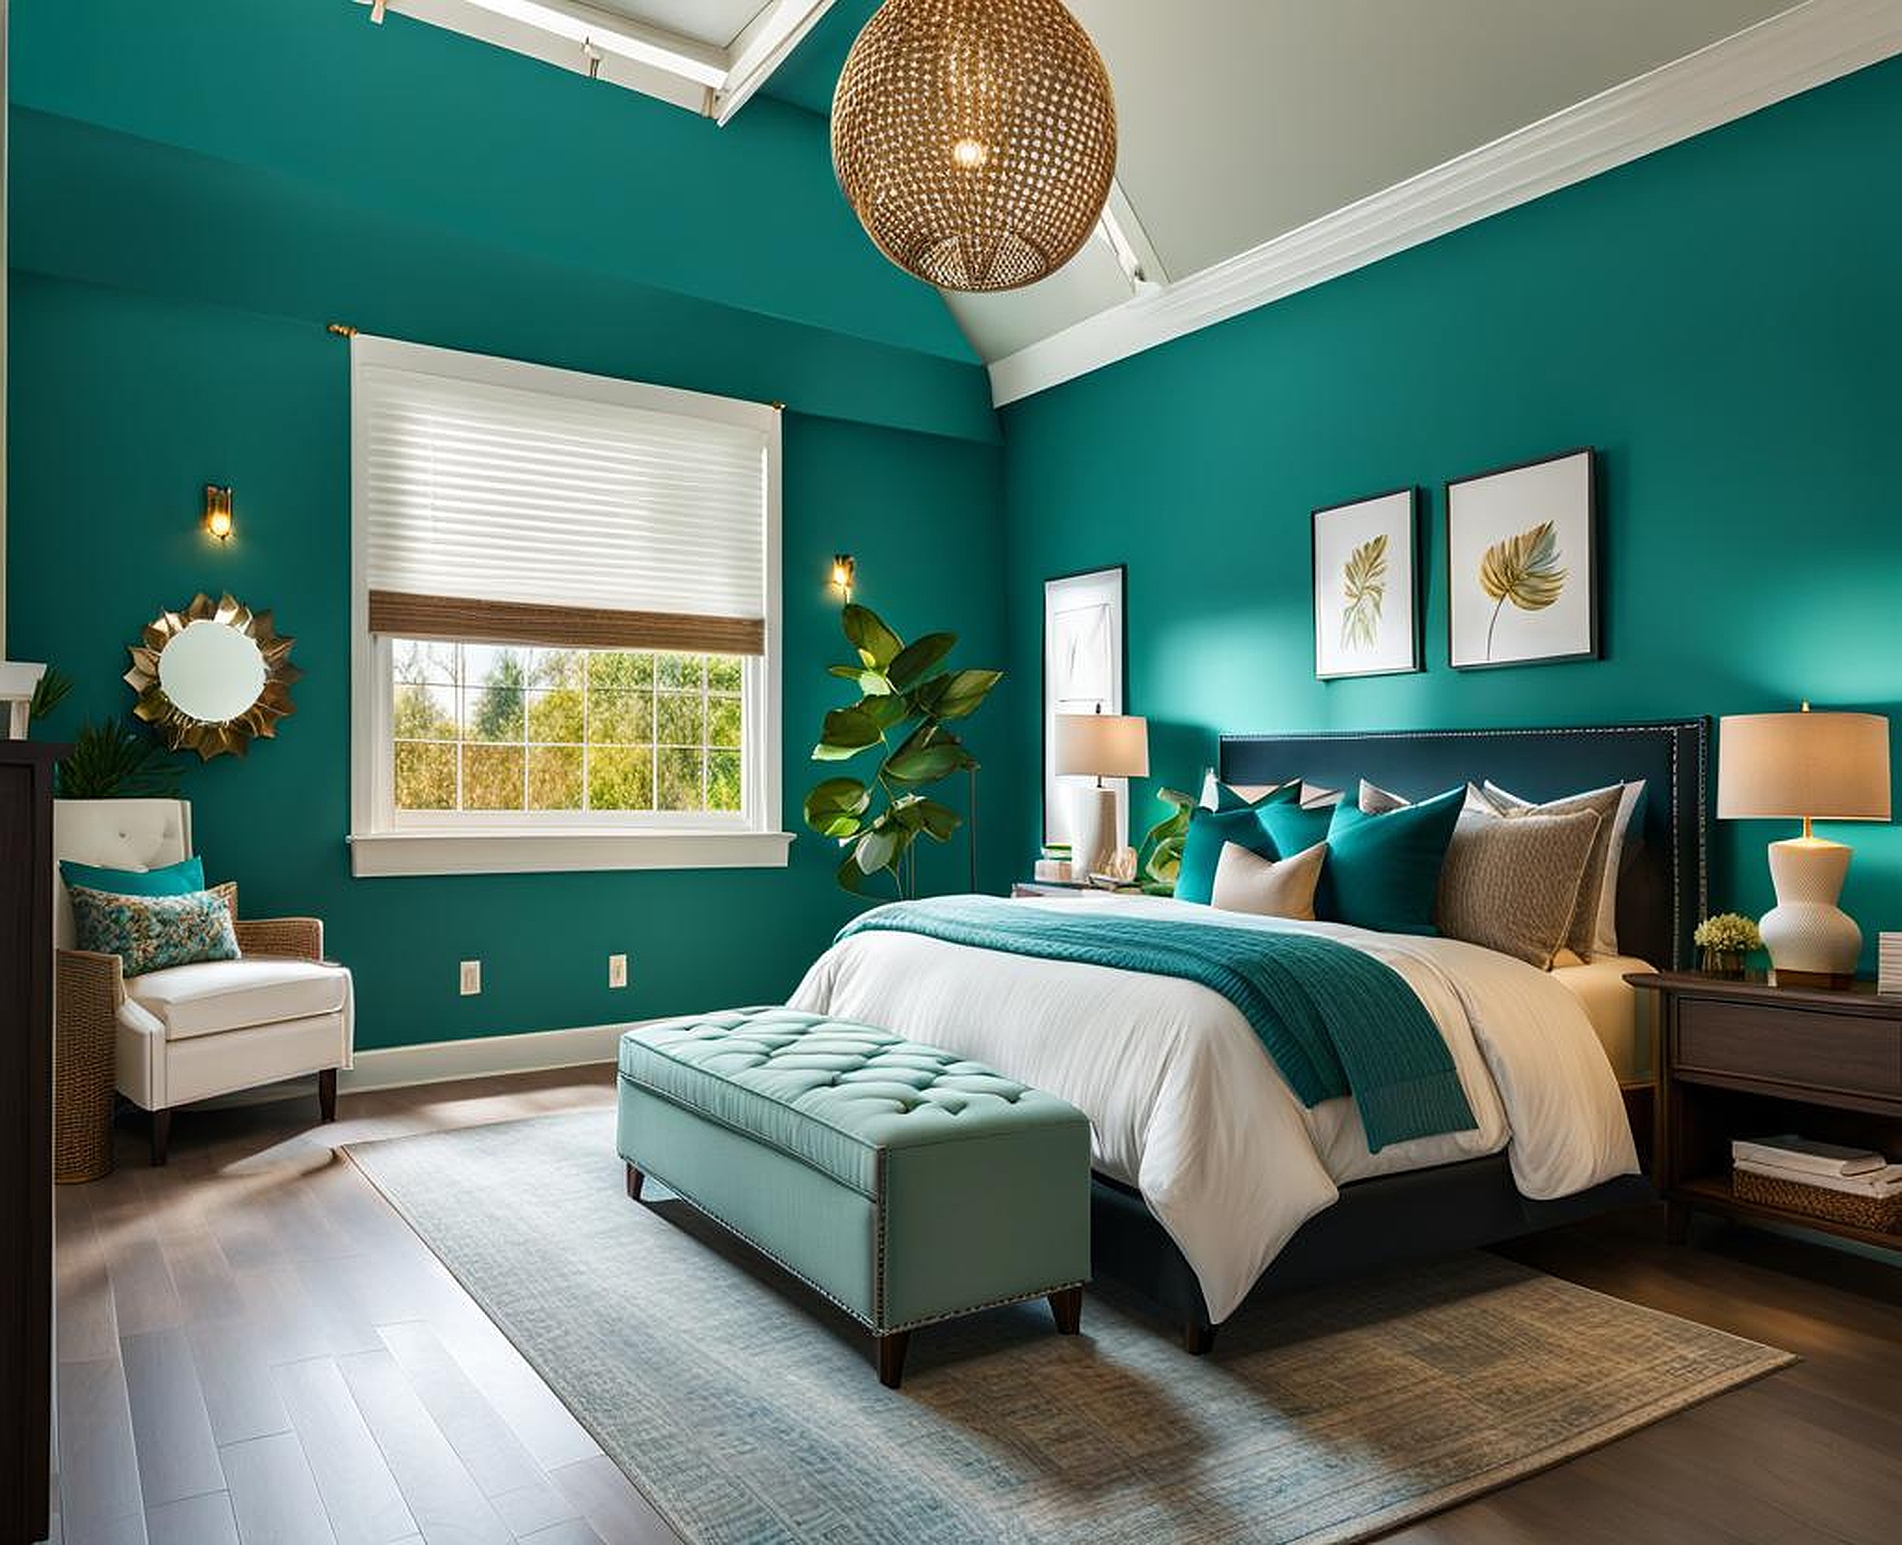 Using Teal Paint in a Bedroom – Tips and Tricks